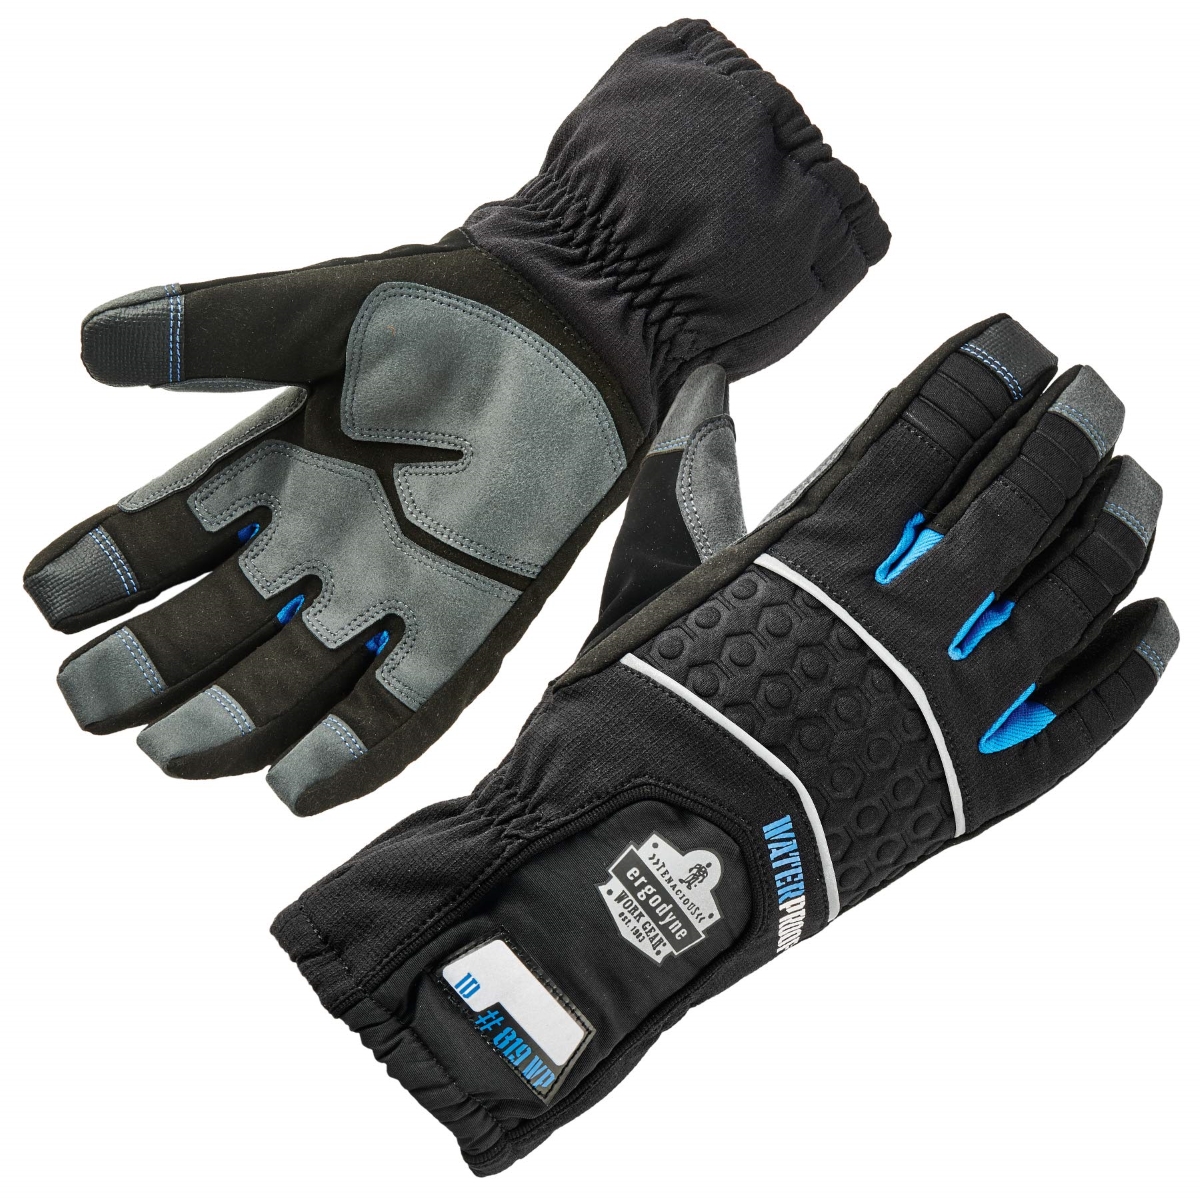 ESD Anti-Static Heat-Resistant Gloves 11 2XL 4801-005